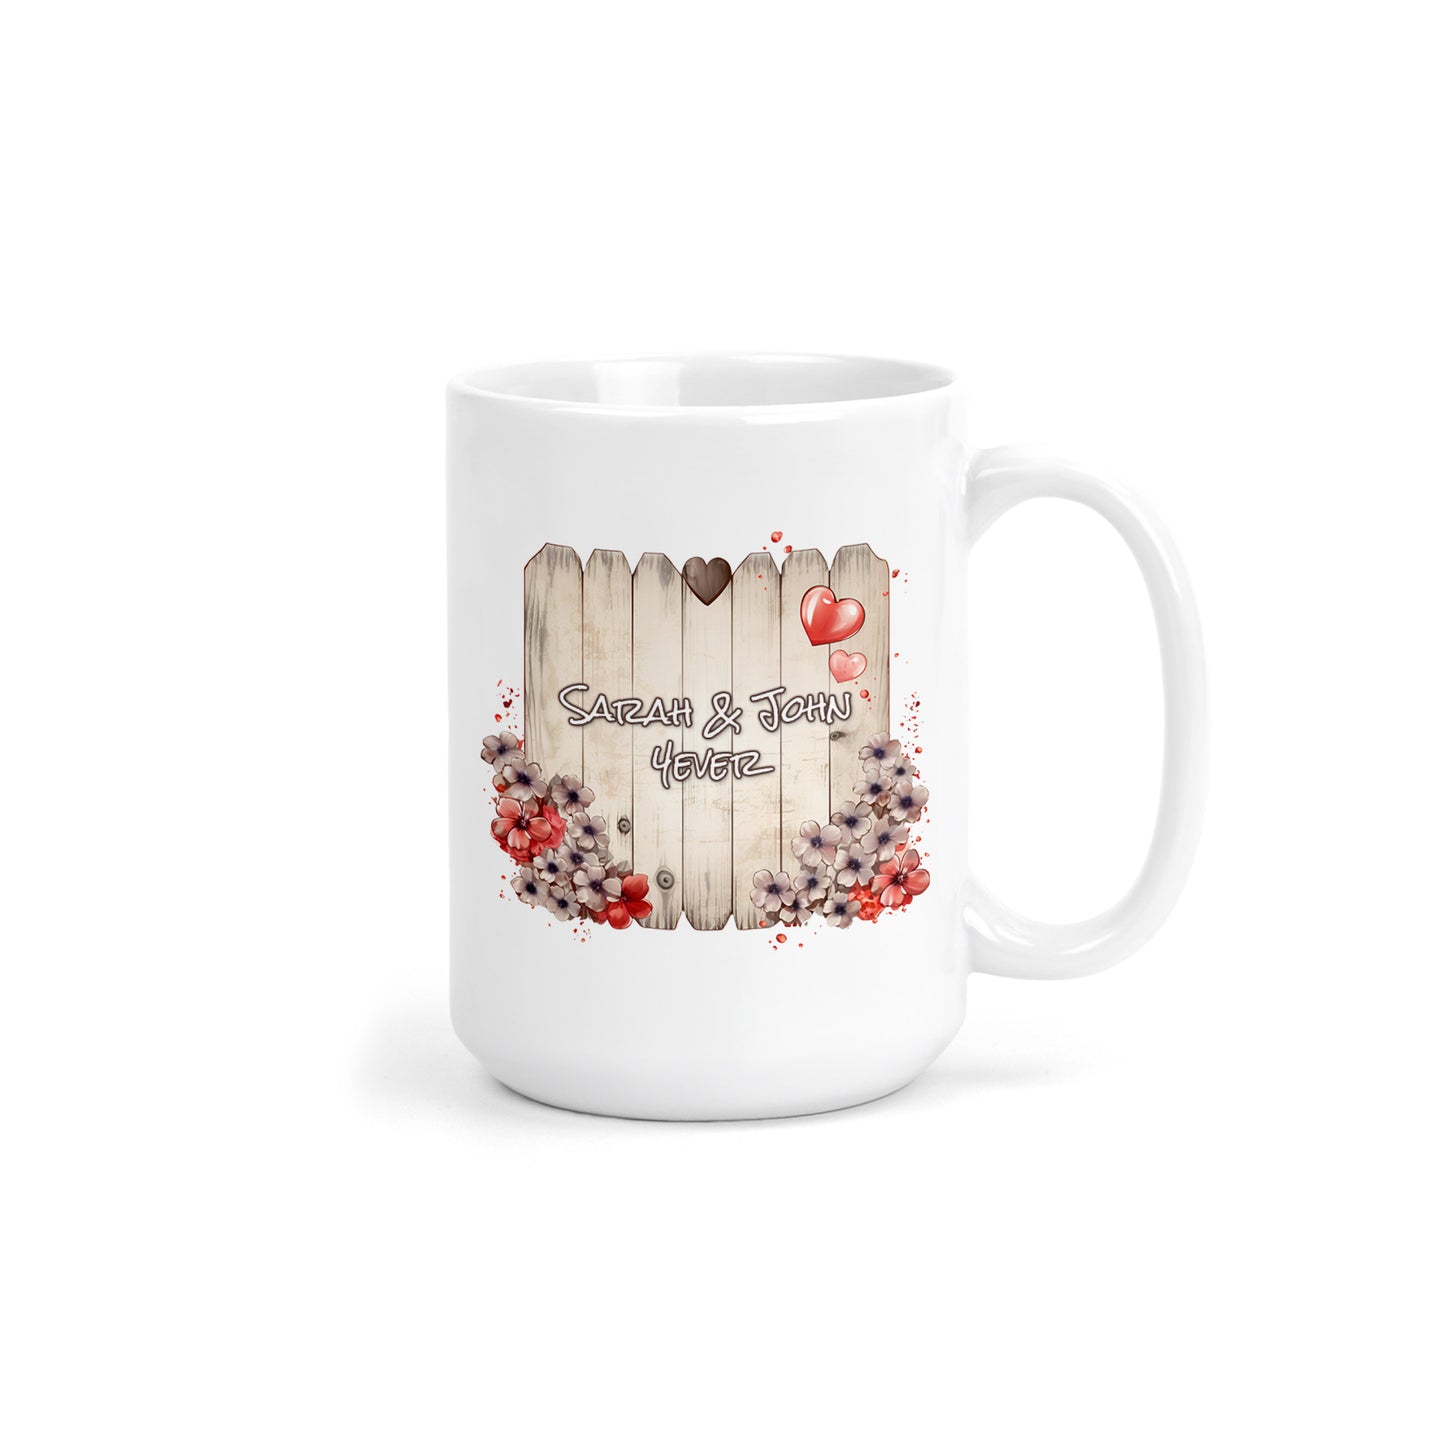 Customized 15oz Coffee Mug with Romantic Tree Carving-Inspired Wood Sign Design for Valentine's Day - Choose from 15 Unique Sign Designs